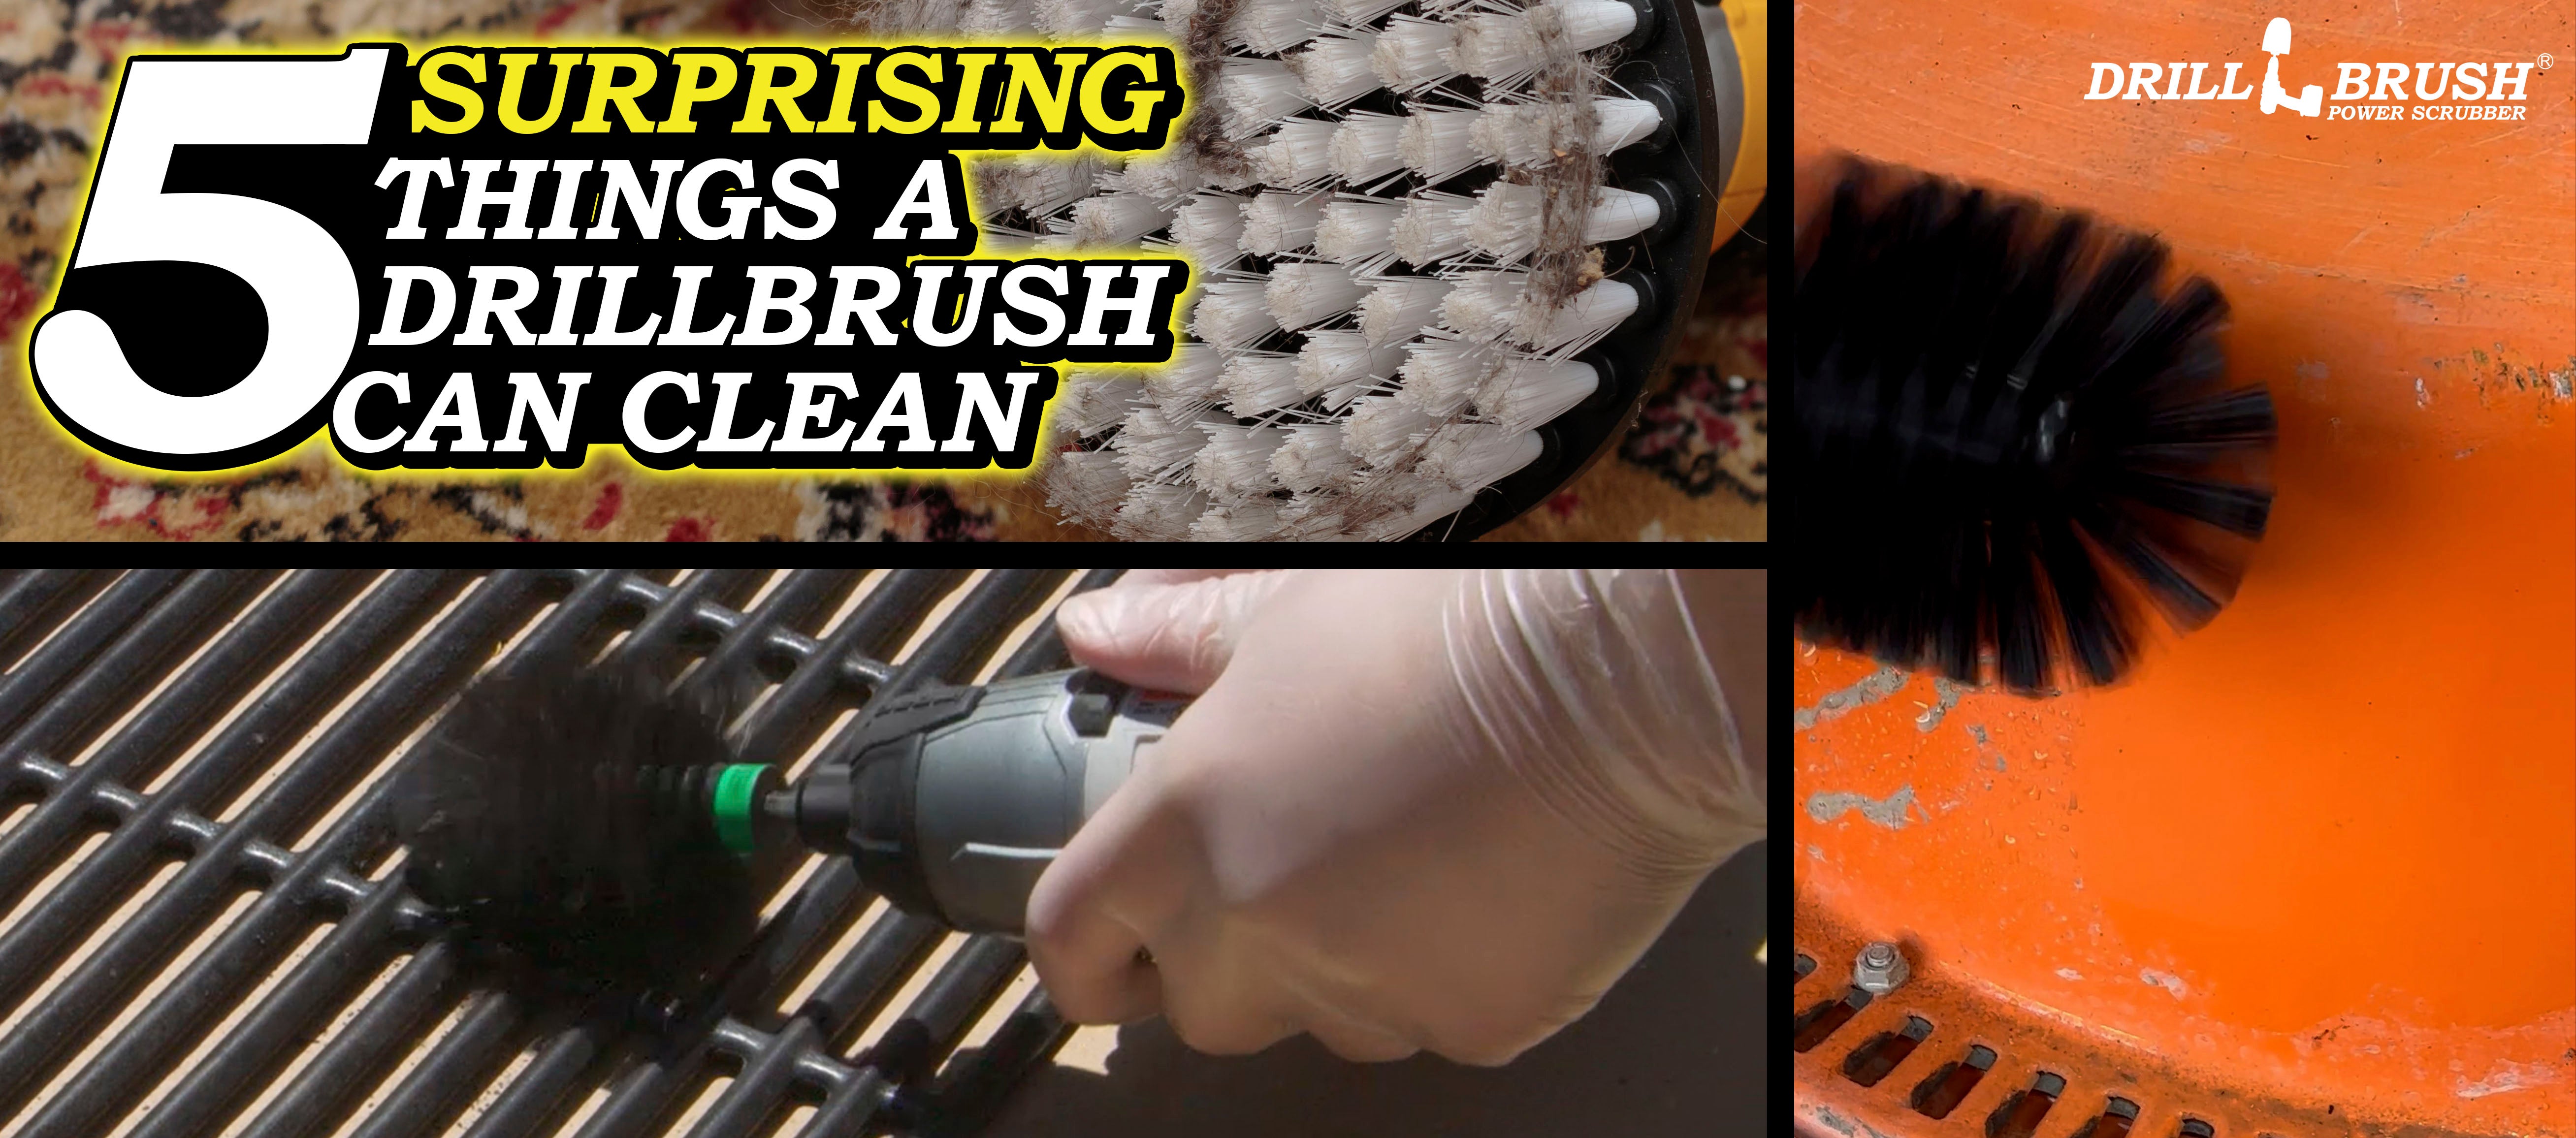 5 Surprising Things a Drillbrush Can Clean